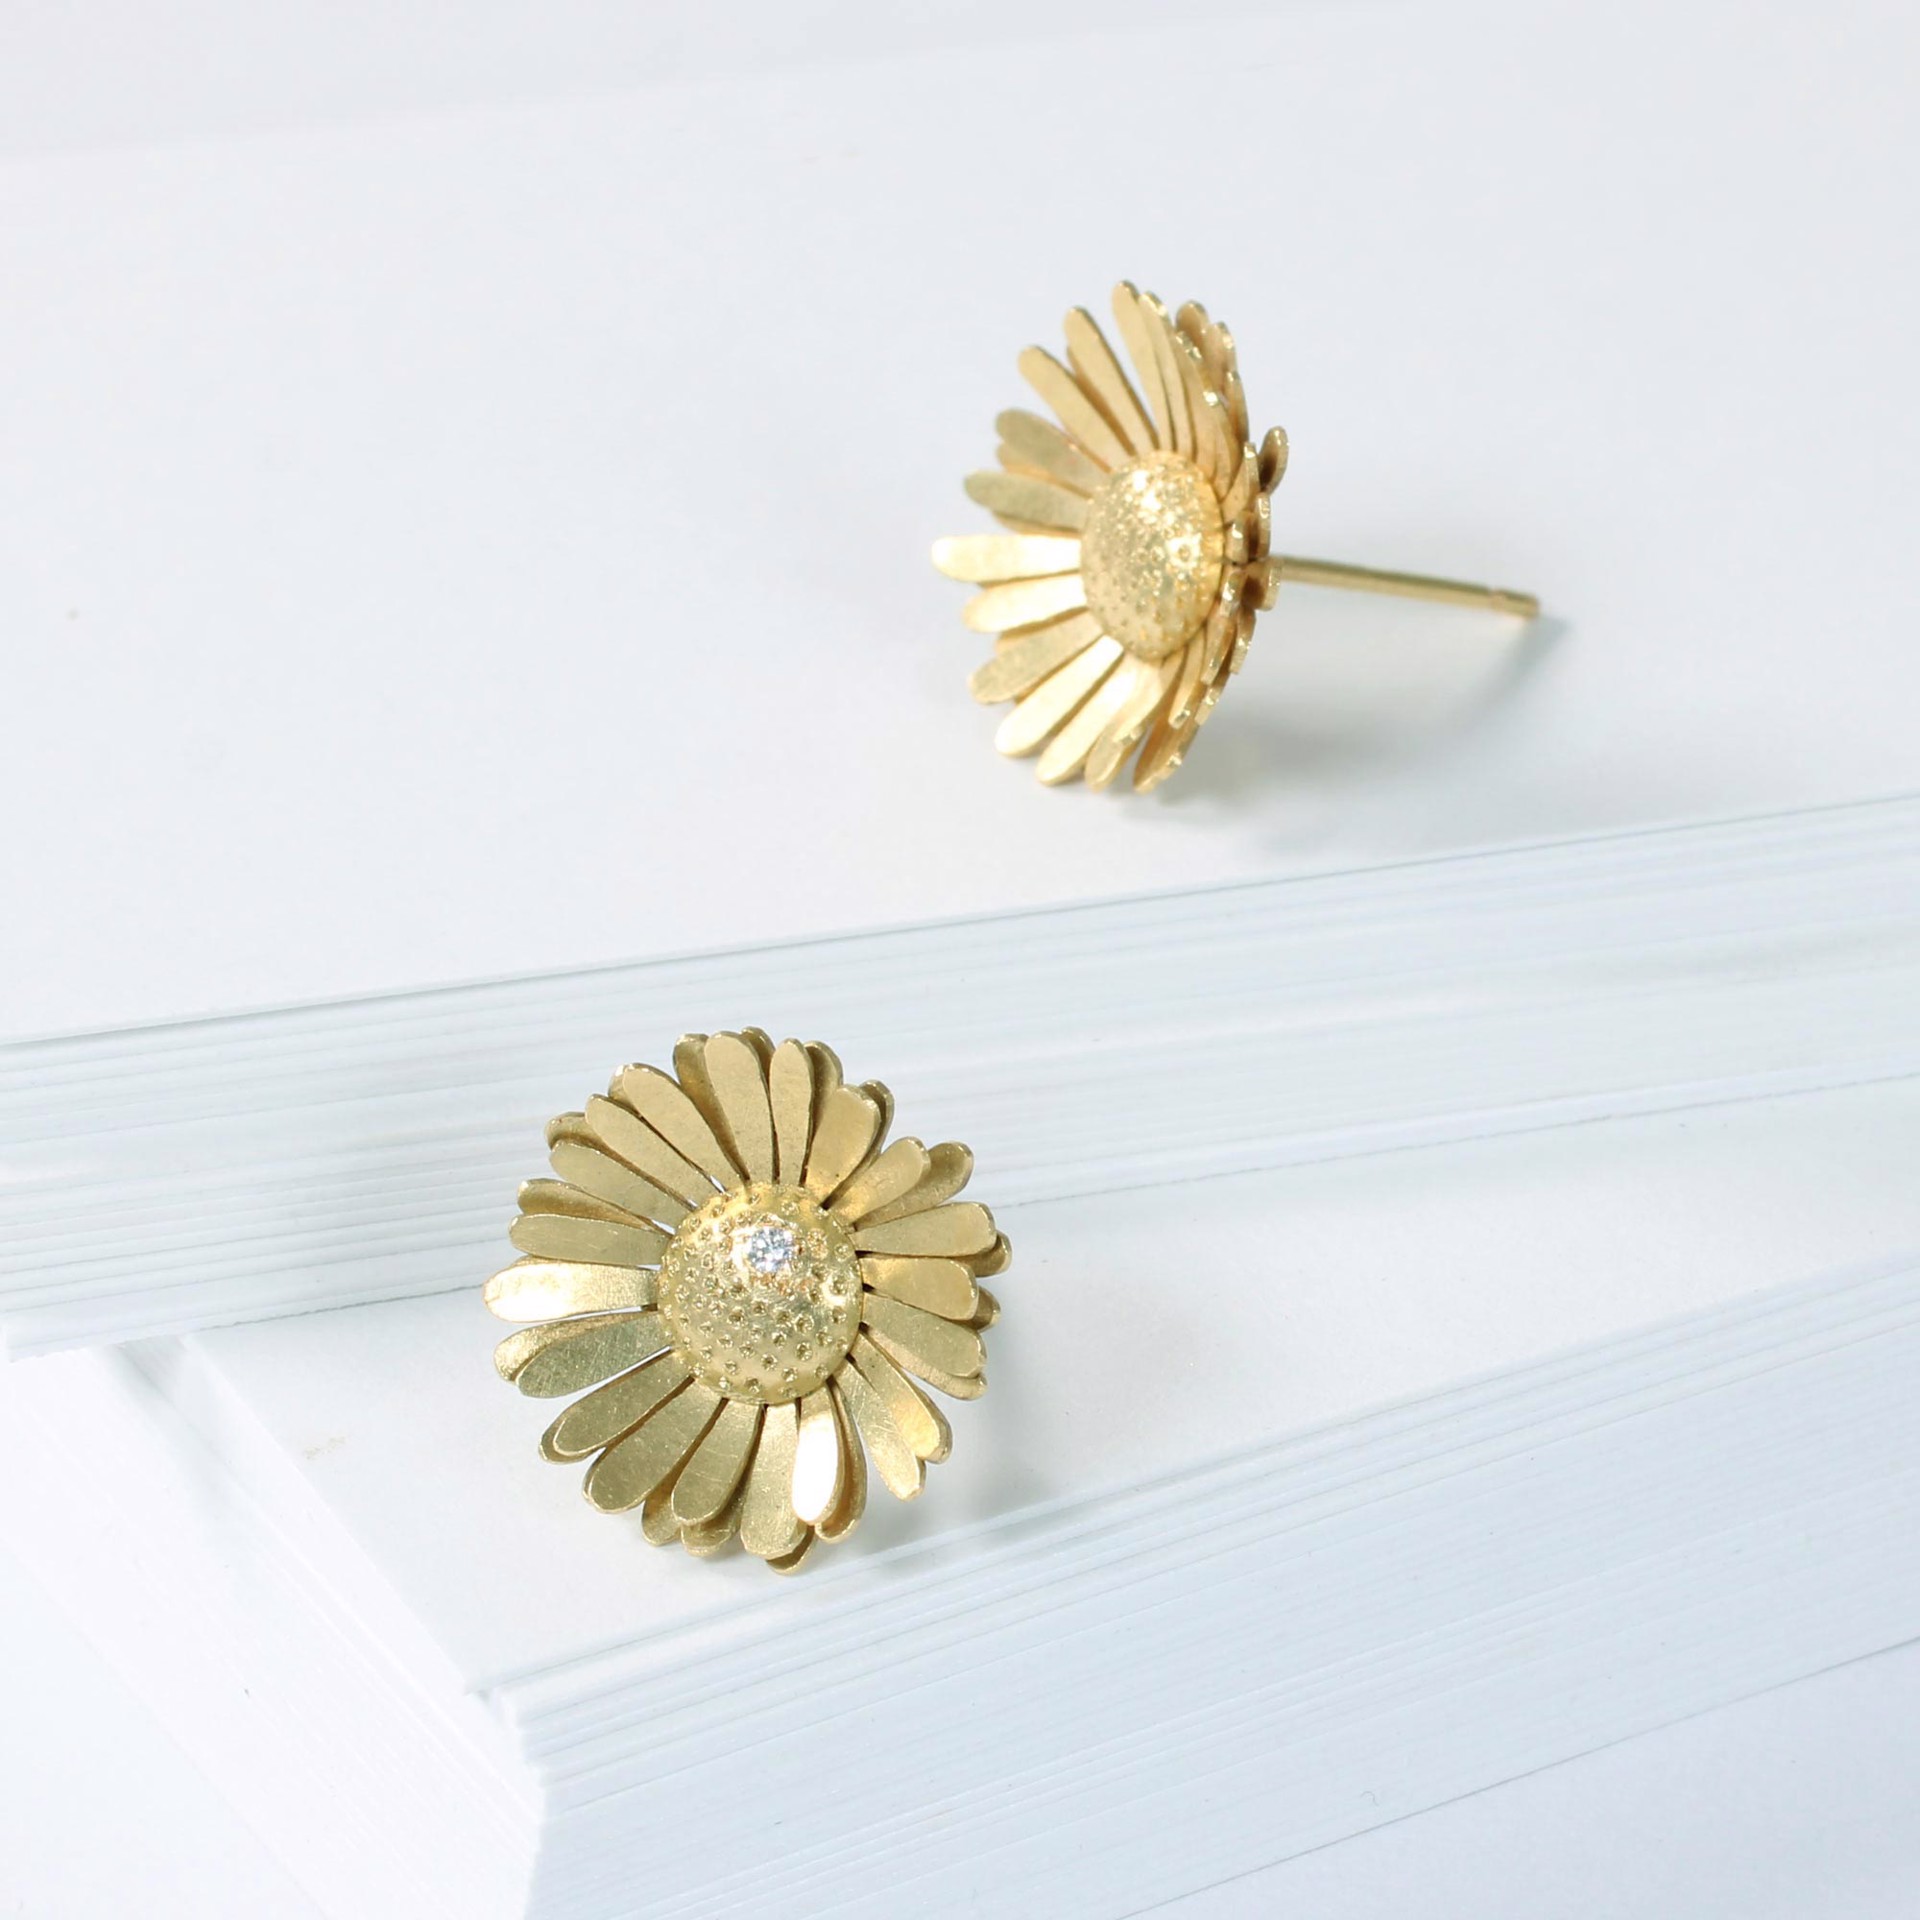 Golden Daisy Earrings by Christopher Thompson Royds